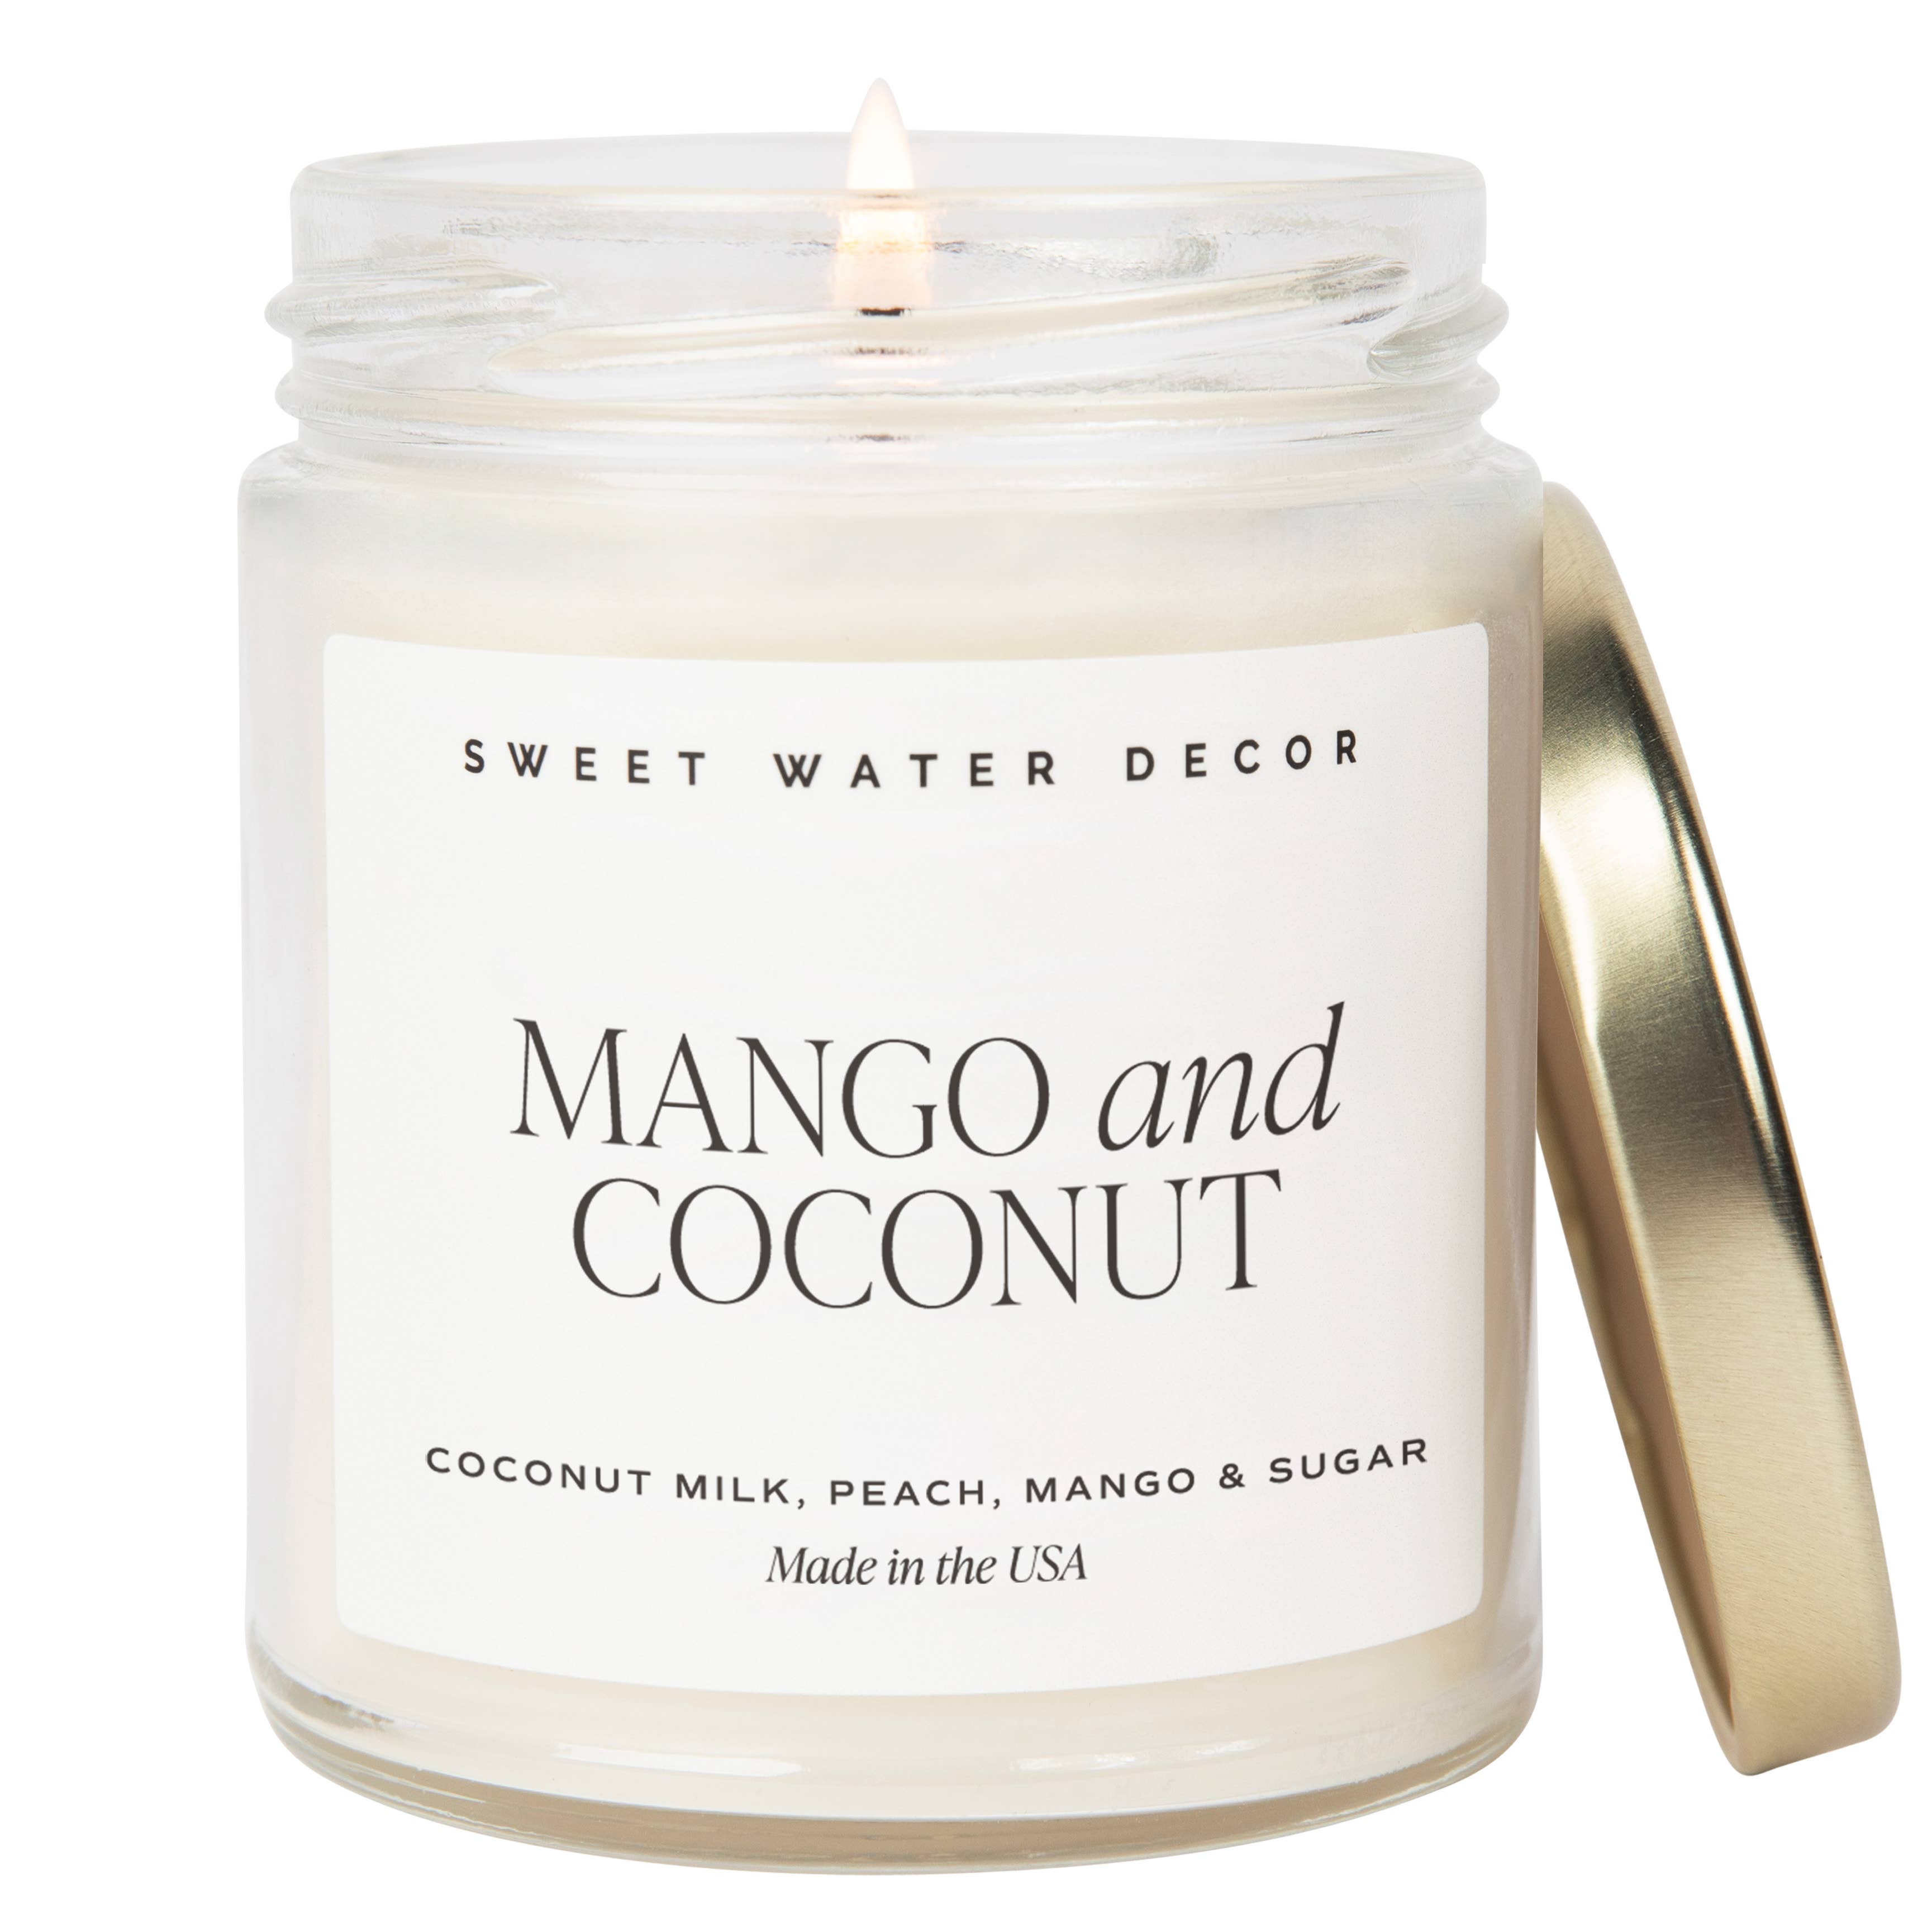 Mango and Coconut 9 oz Soy Candle - Home Decor & Gifts